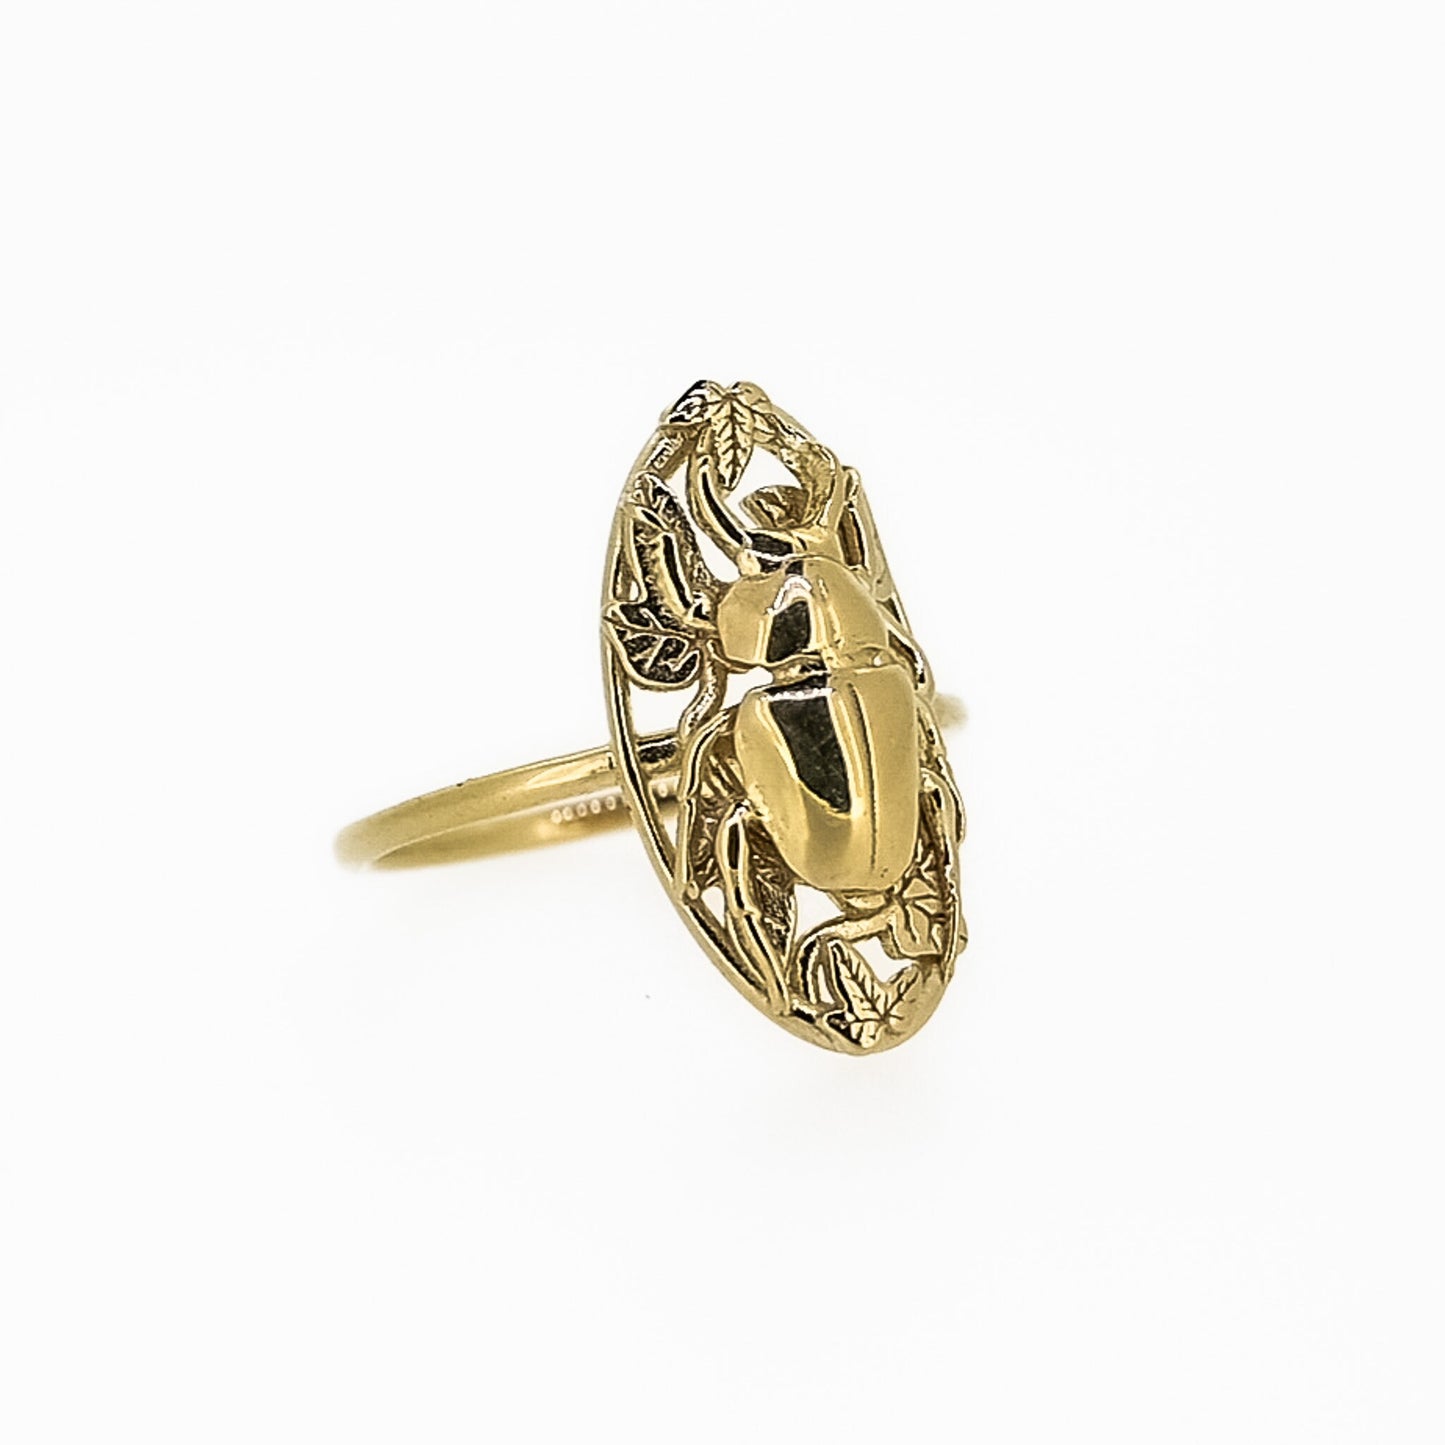 Stag Beetle Ring Nestled in a Bed of Ivy